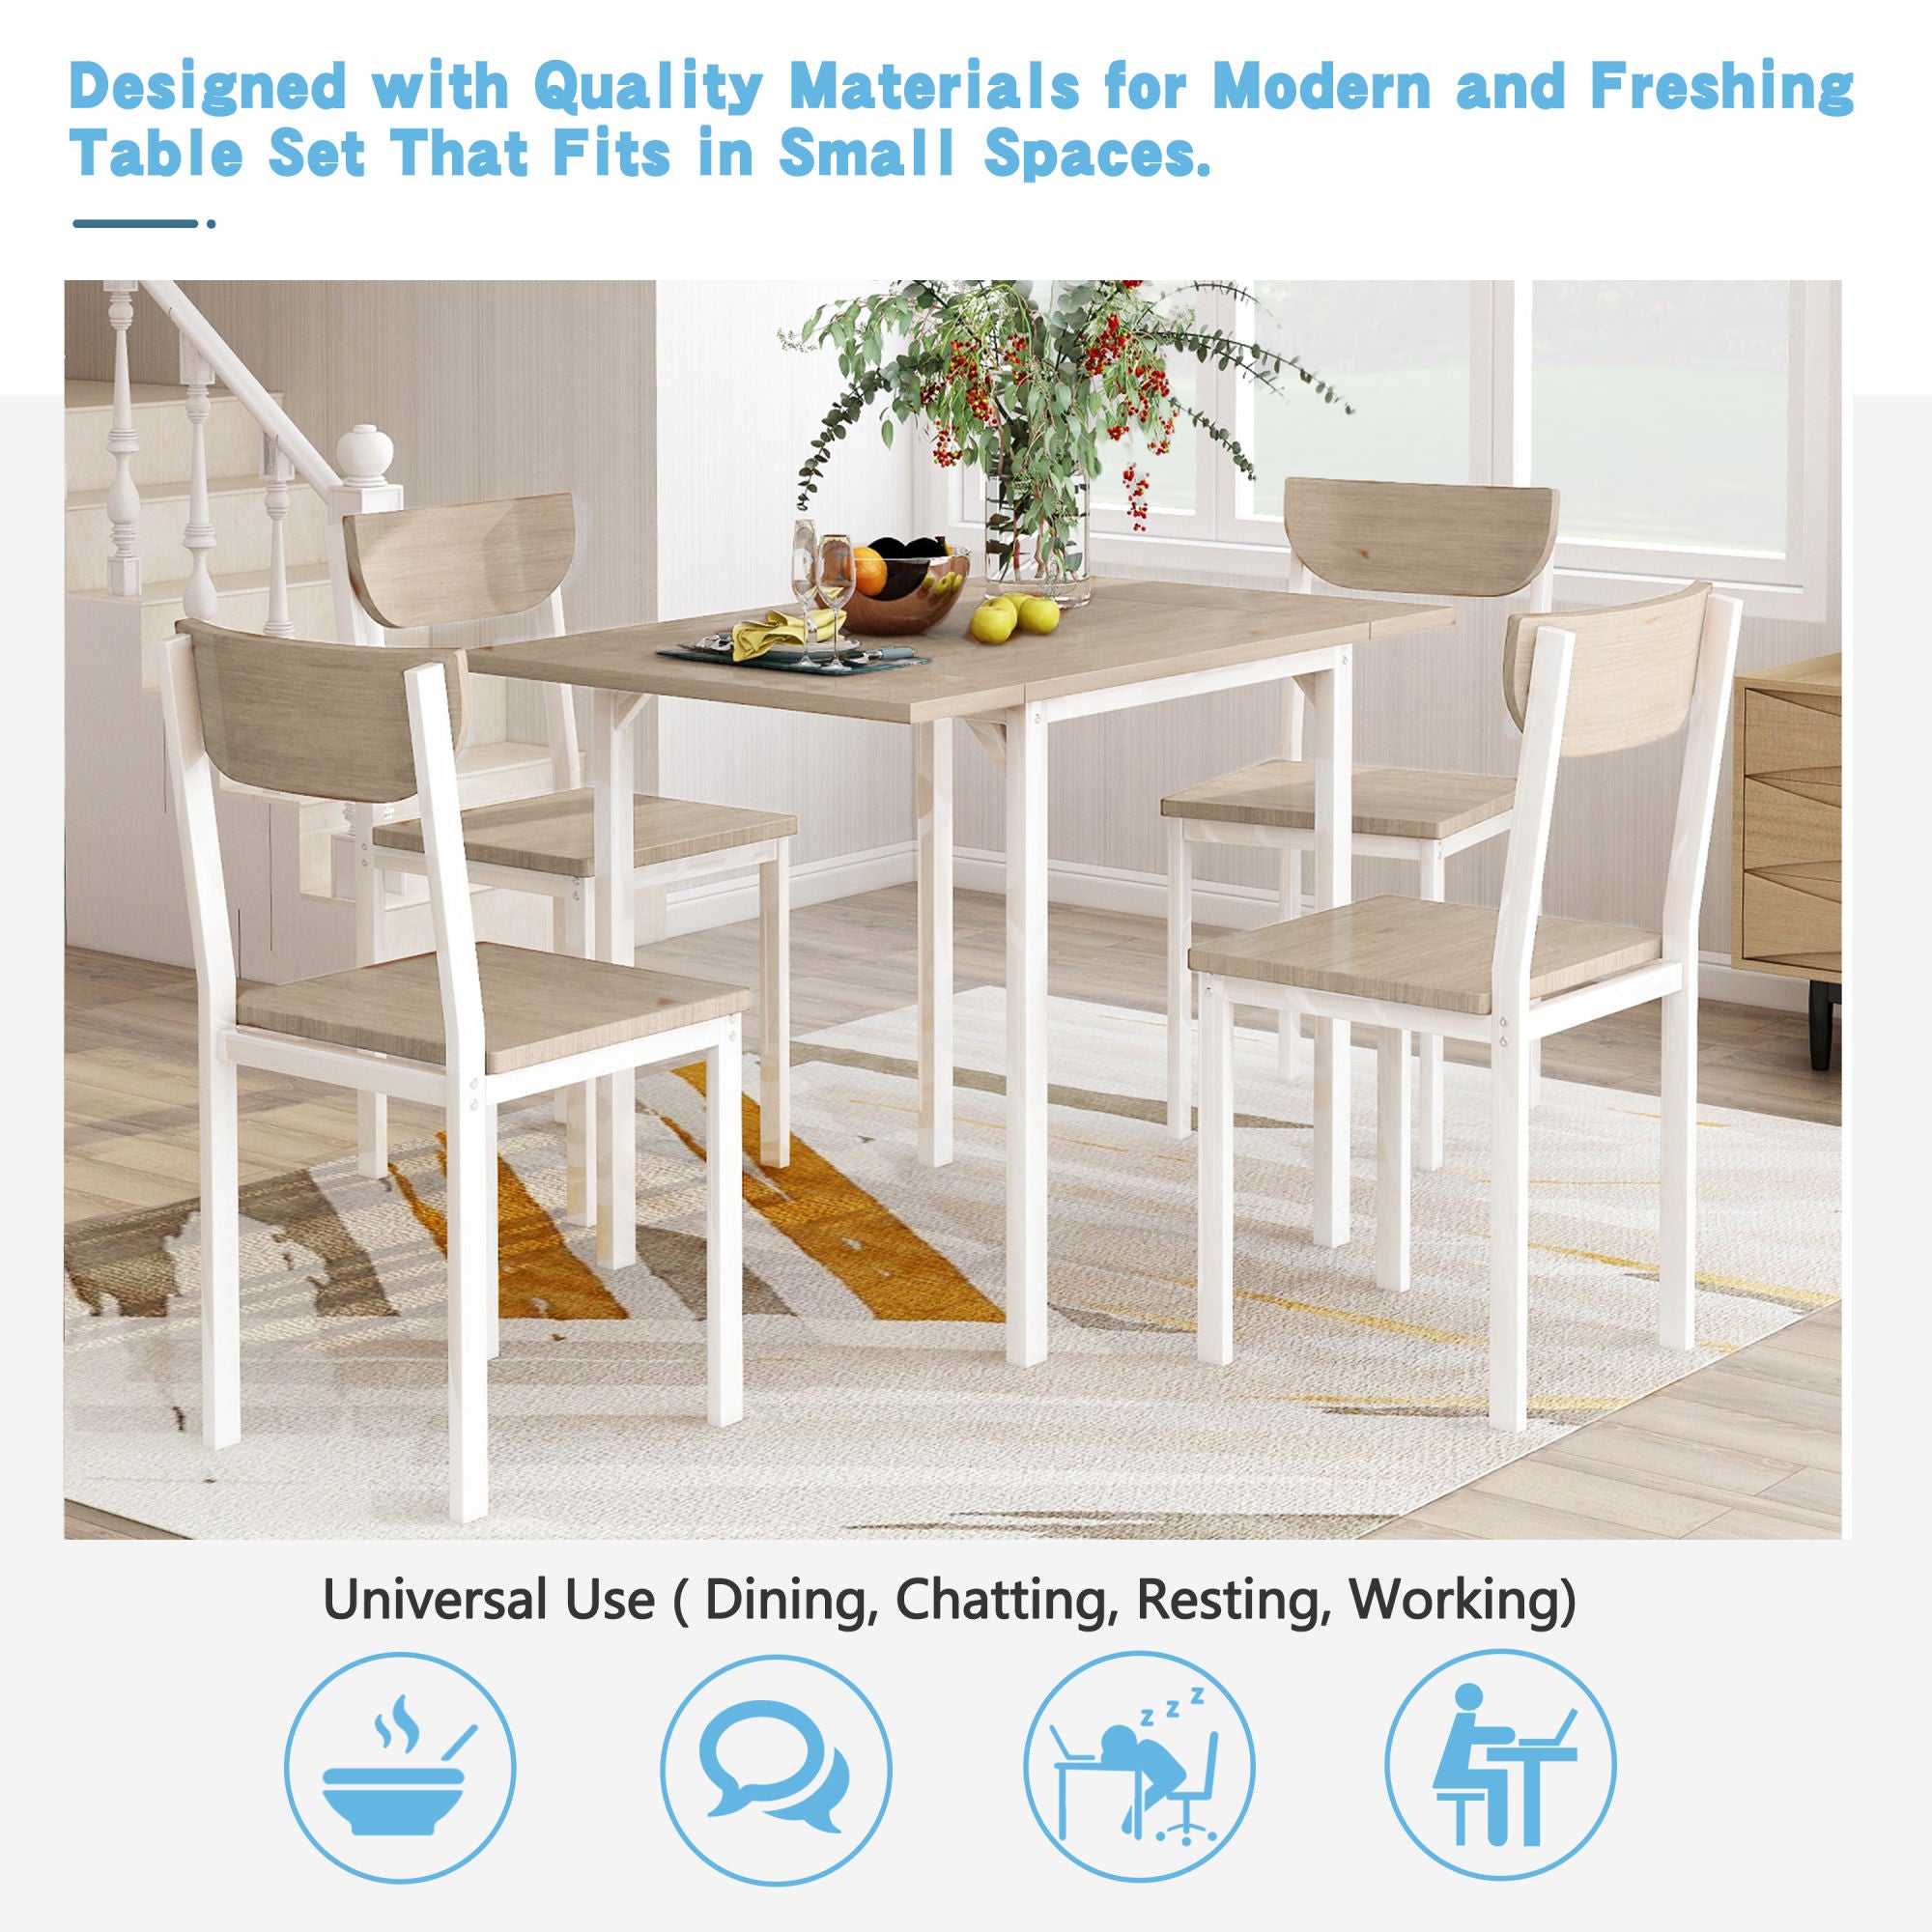 TOPMAX 5-piece Modern Metal Dining Set with 1 Drop Leaf Dining Table and 4 chairs Home Kitchen Furniture Dinette Set (Oak Finish)